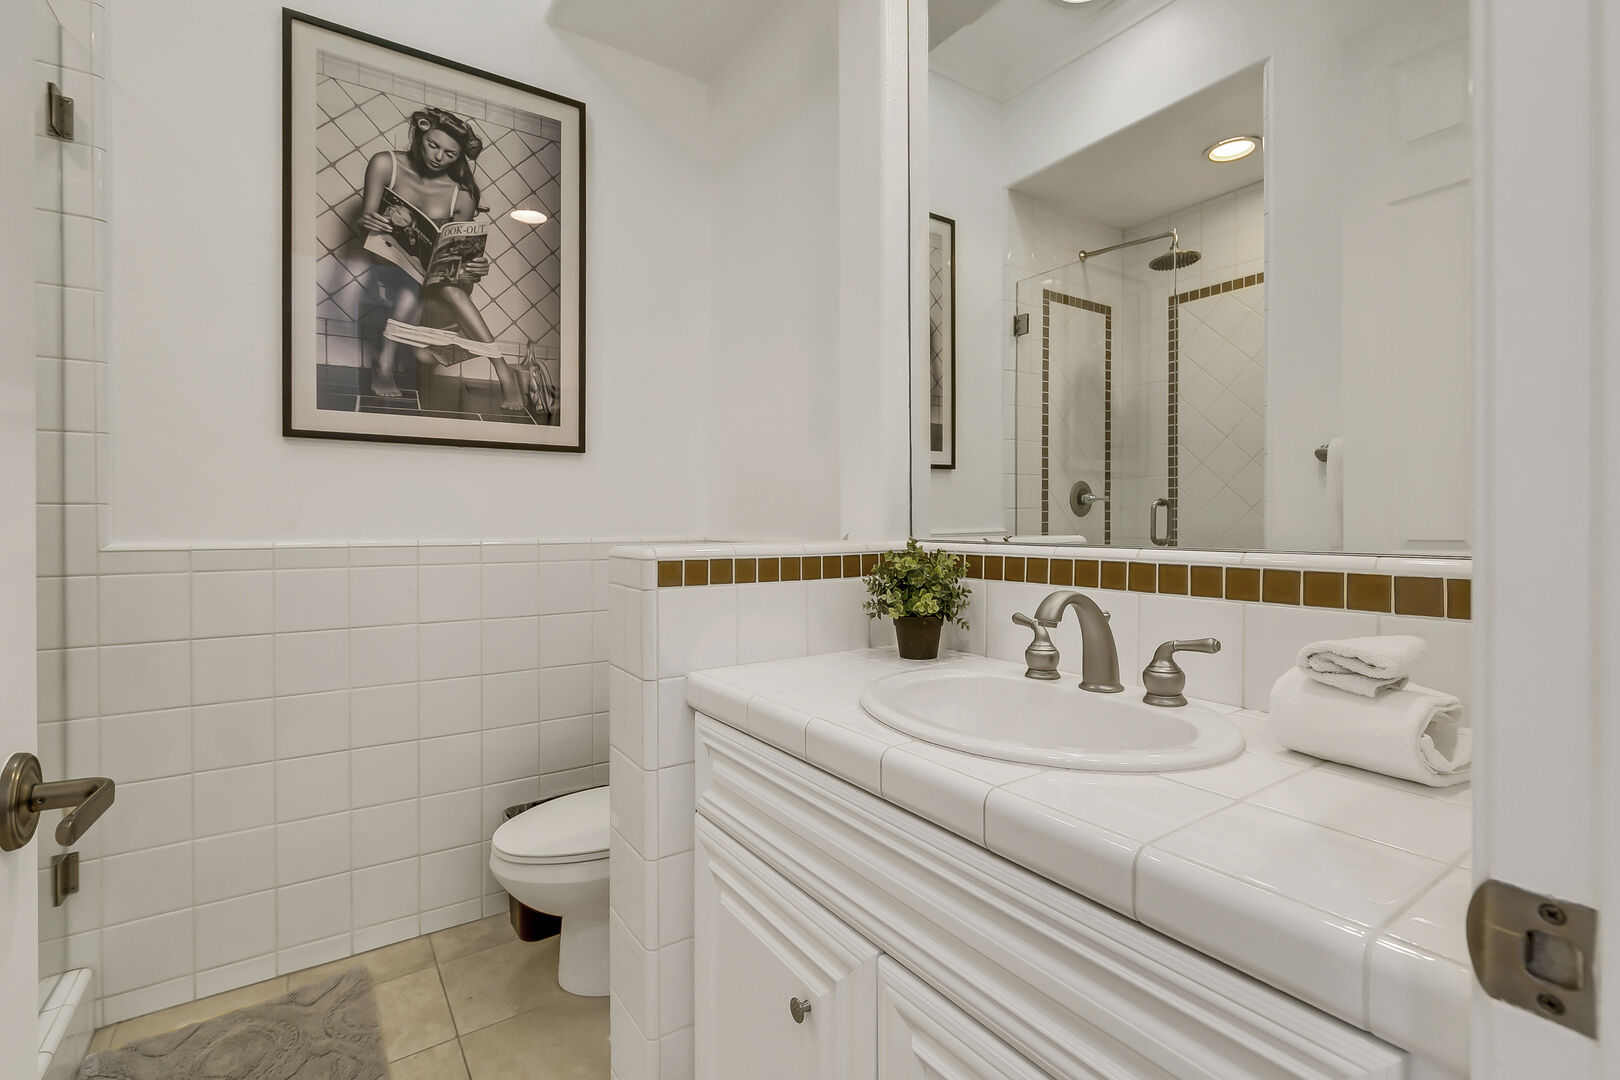 Casita Suite 3's bathroom features a step -in tile shower and vanity sink.